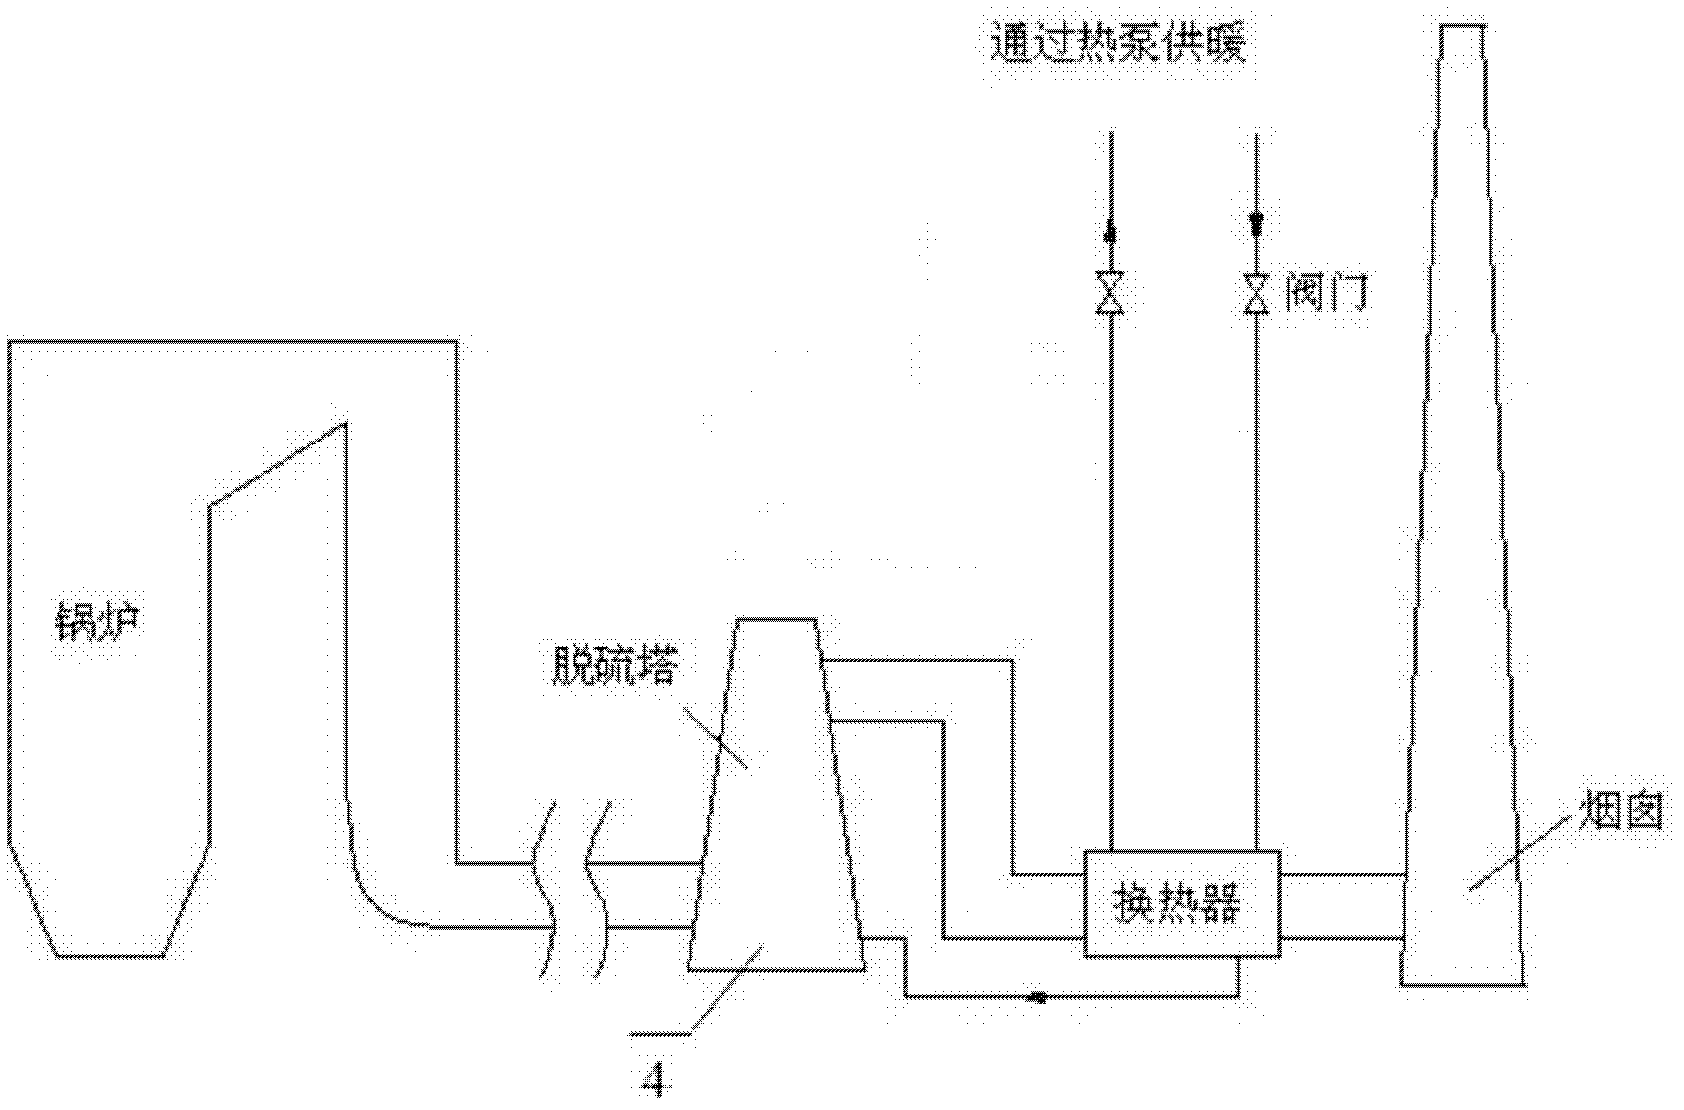 Smoke water condensing and waste heat recovering device